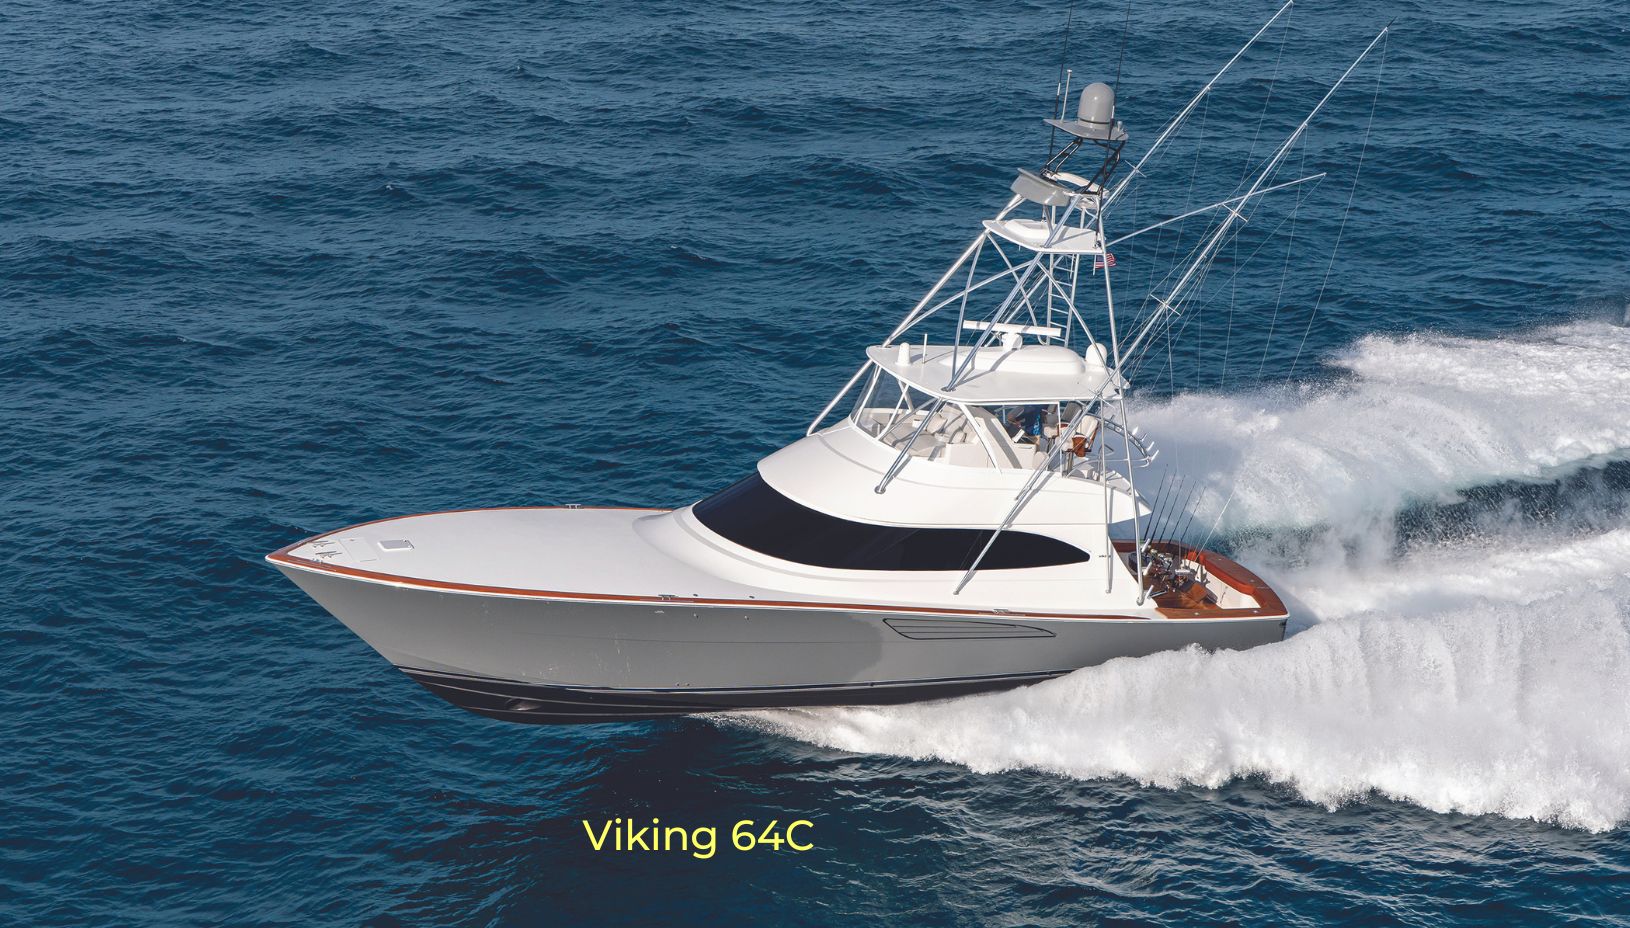 Fishing small boat - All boating and marine industry manufacturers